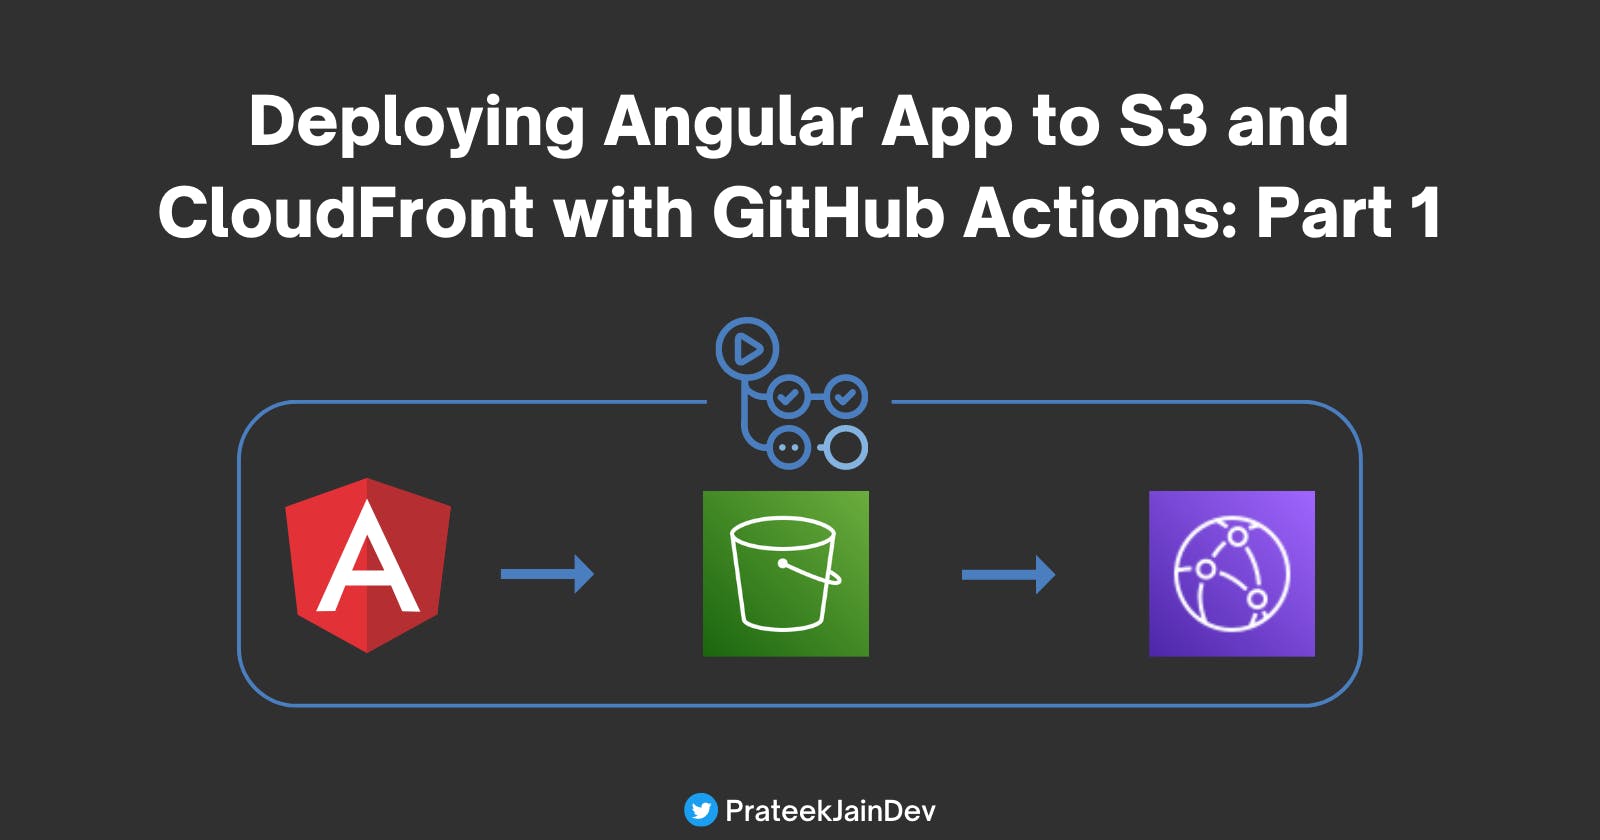 Deploying Angular App to S3 and CloudFront with GitHub Actions: Part 1